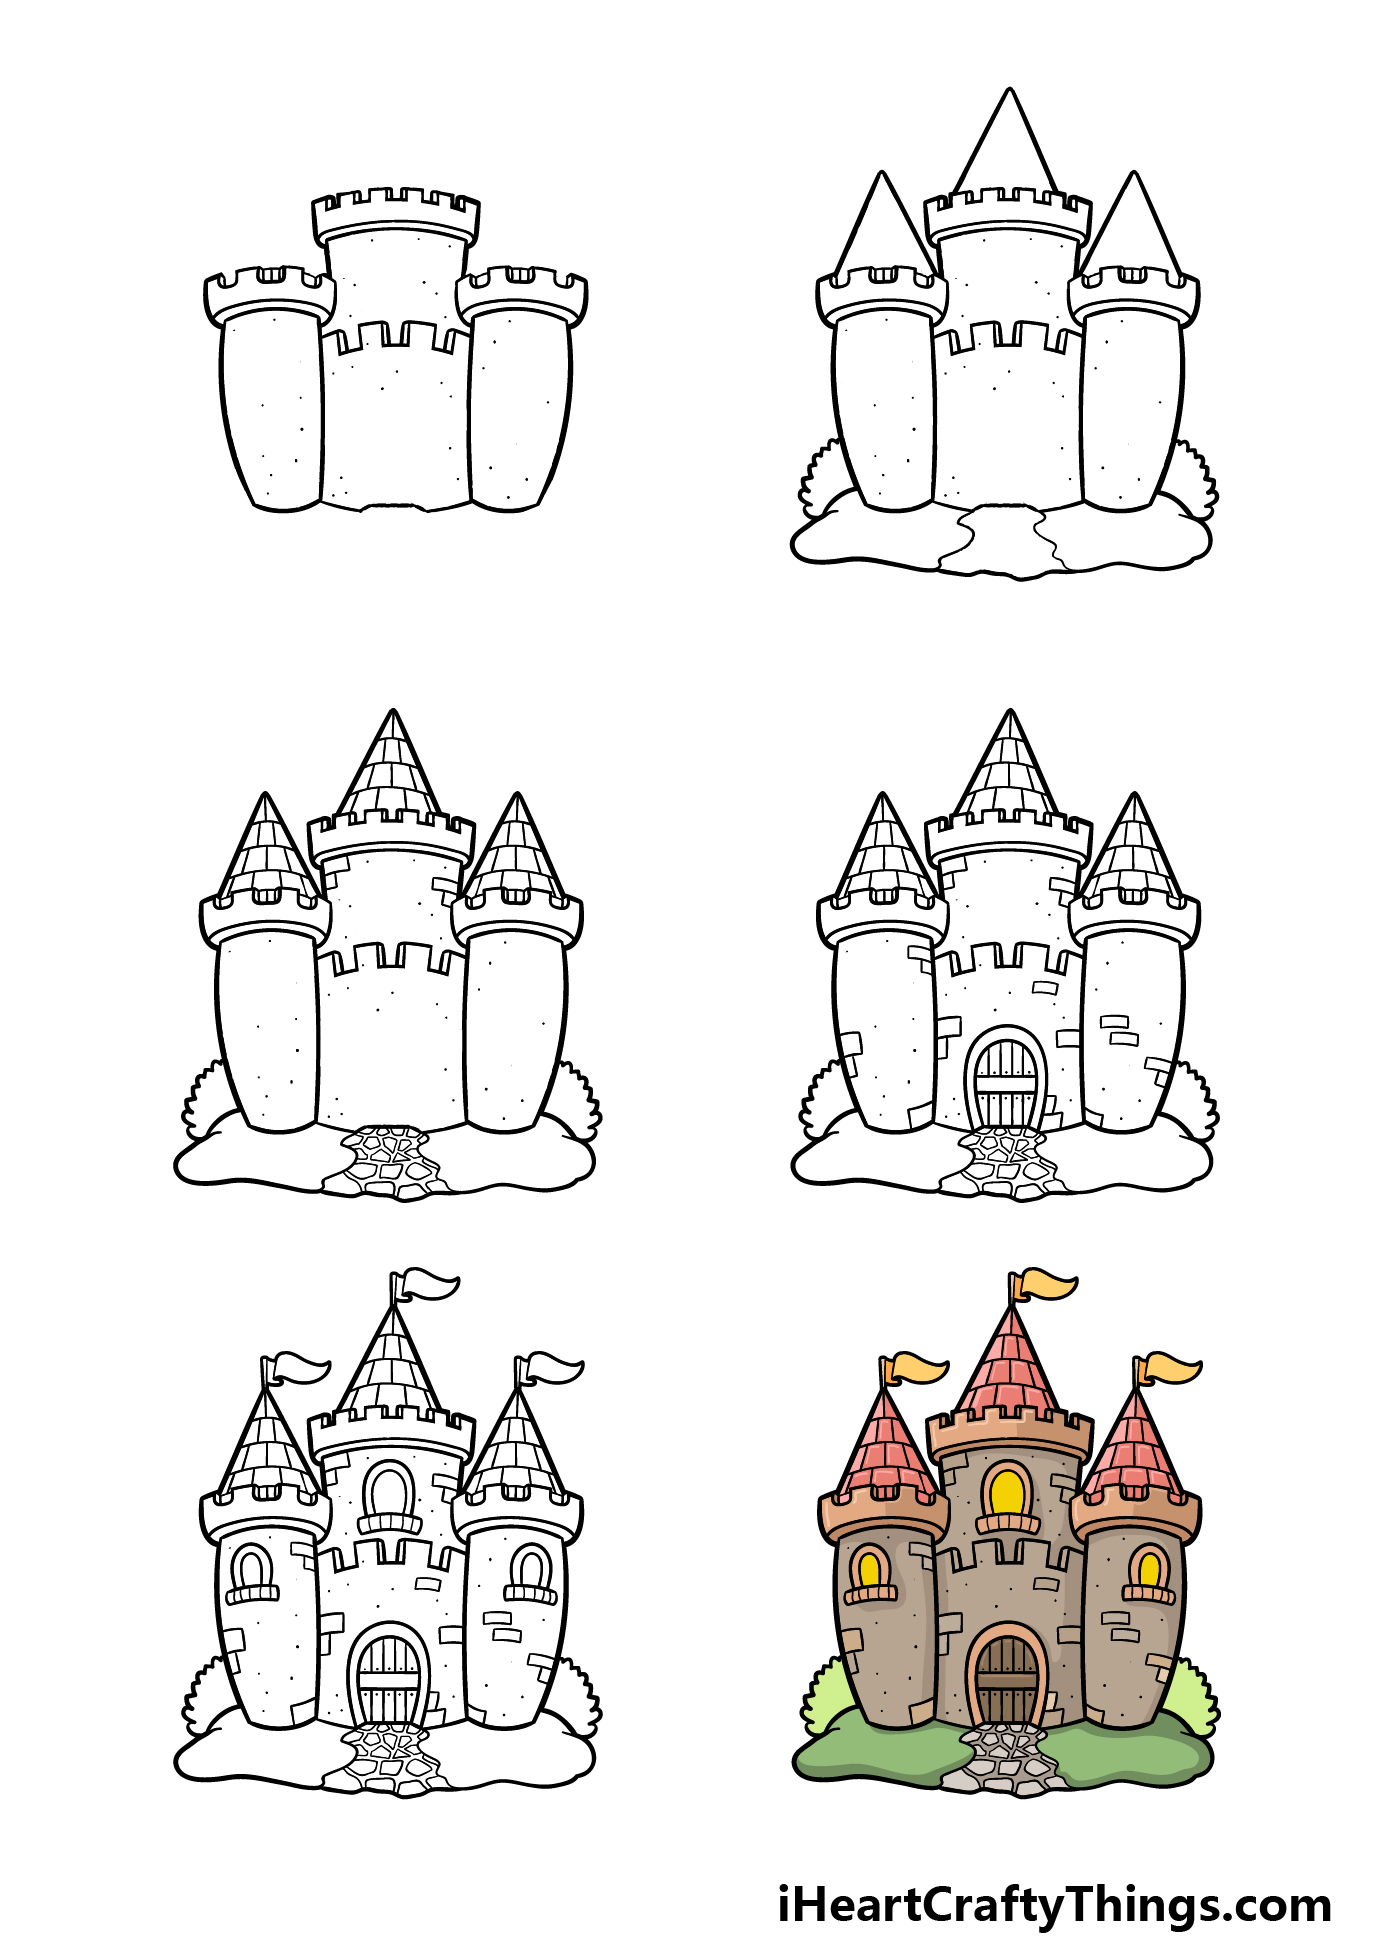 how to draw a cartoon castle in 7 steps